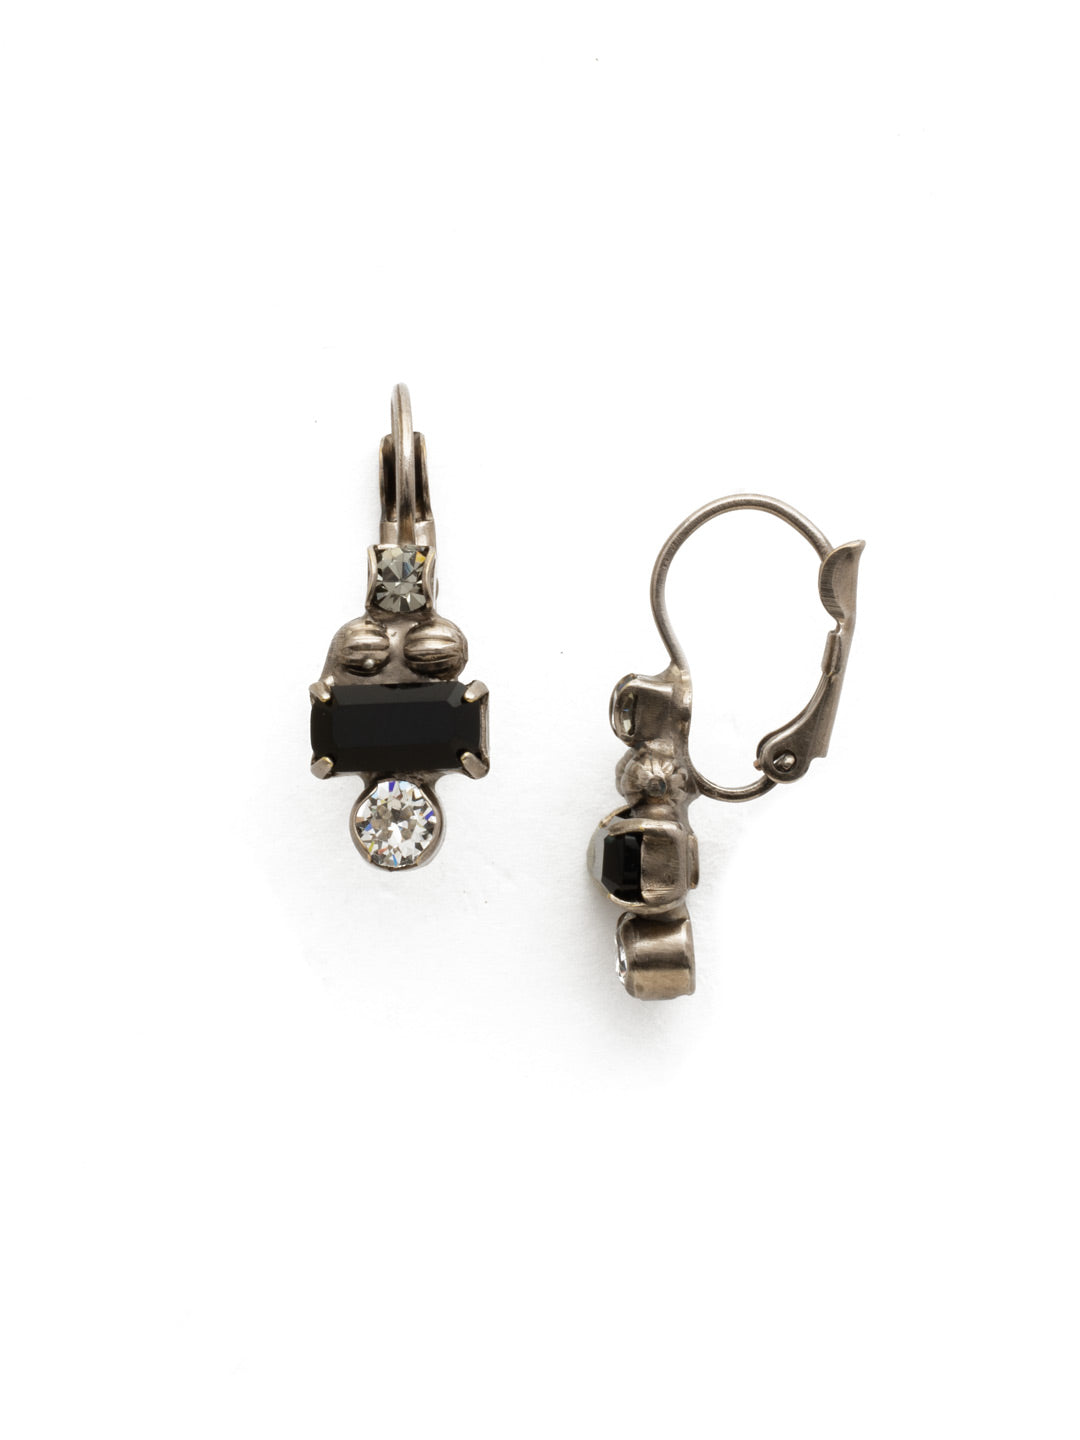 Mazus Dangle Earrings - EDX12ASBLT - A detailed earring with a side-set baguette and two petite round crystals. From Sorrelli's Black Tie collection in our Antique Silver-tone finish.